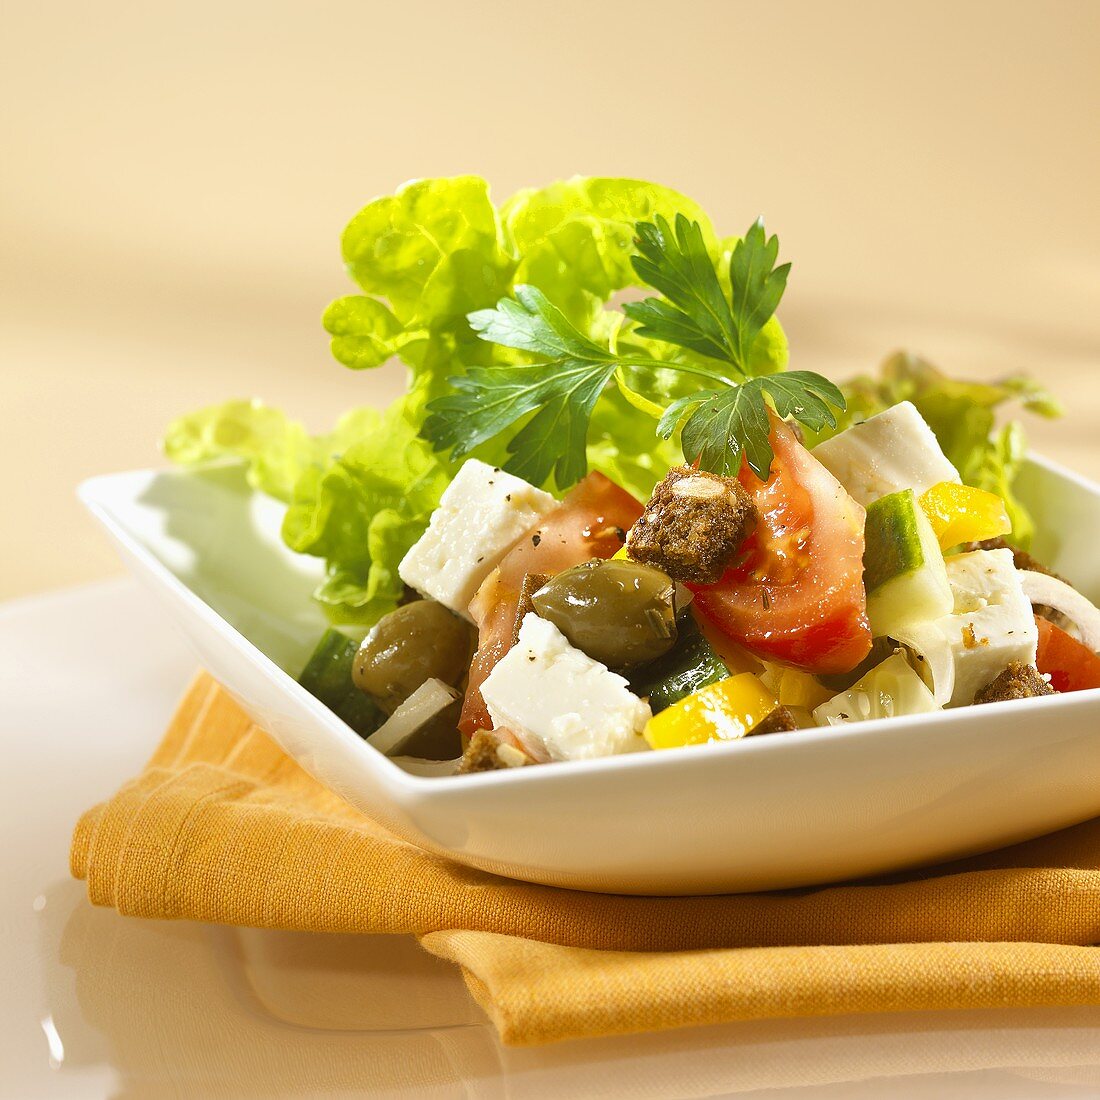 Greek salad with croutons